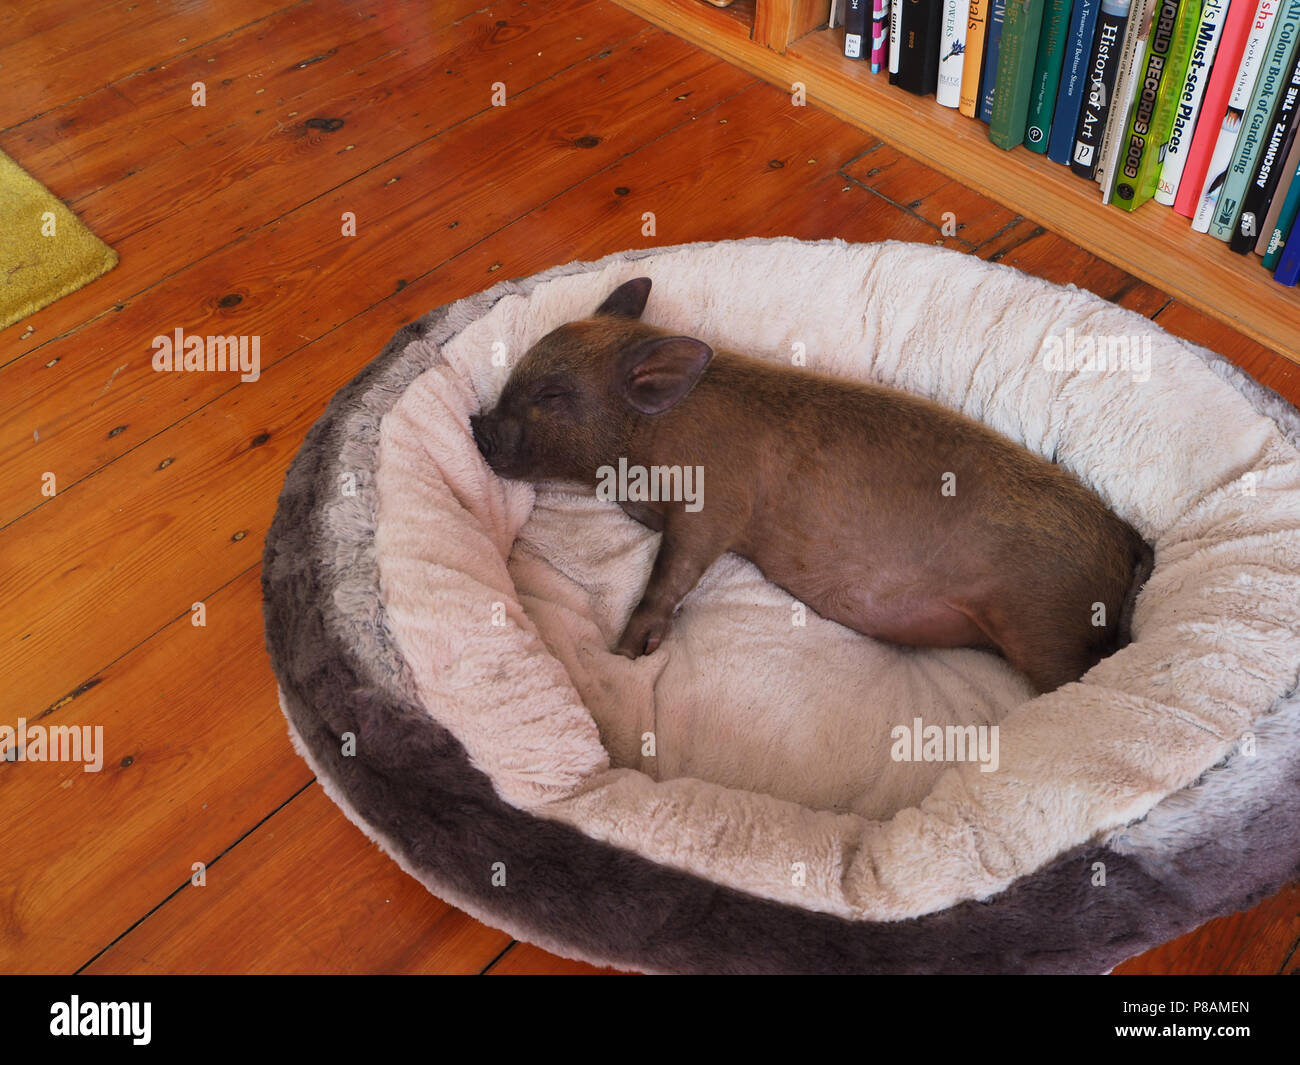 Micro Pig in a household setting Stock Photo